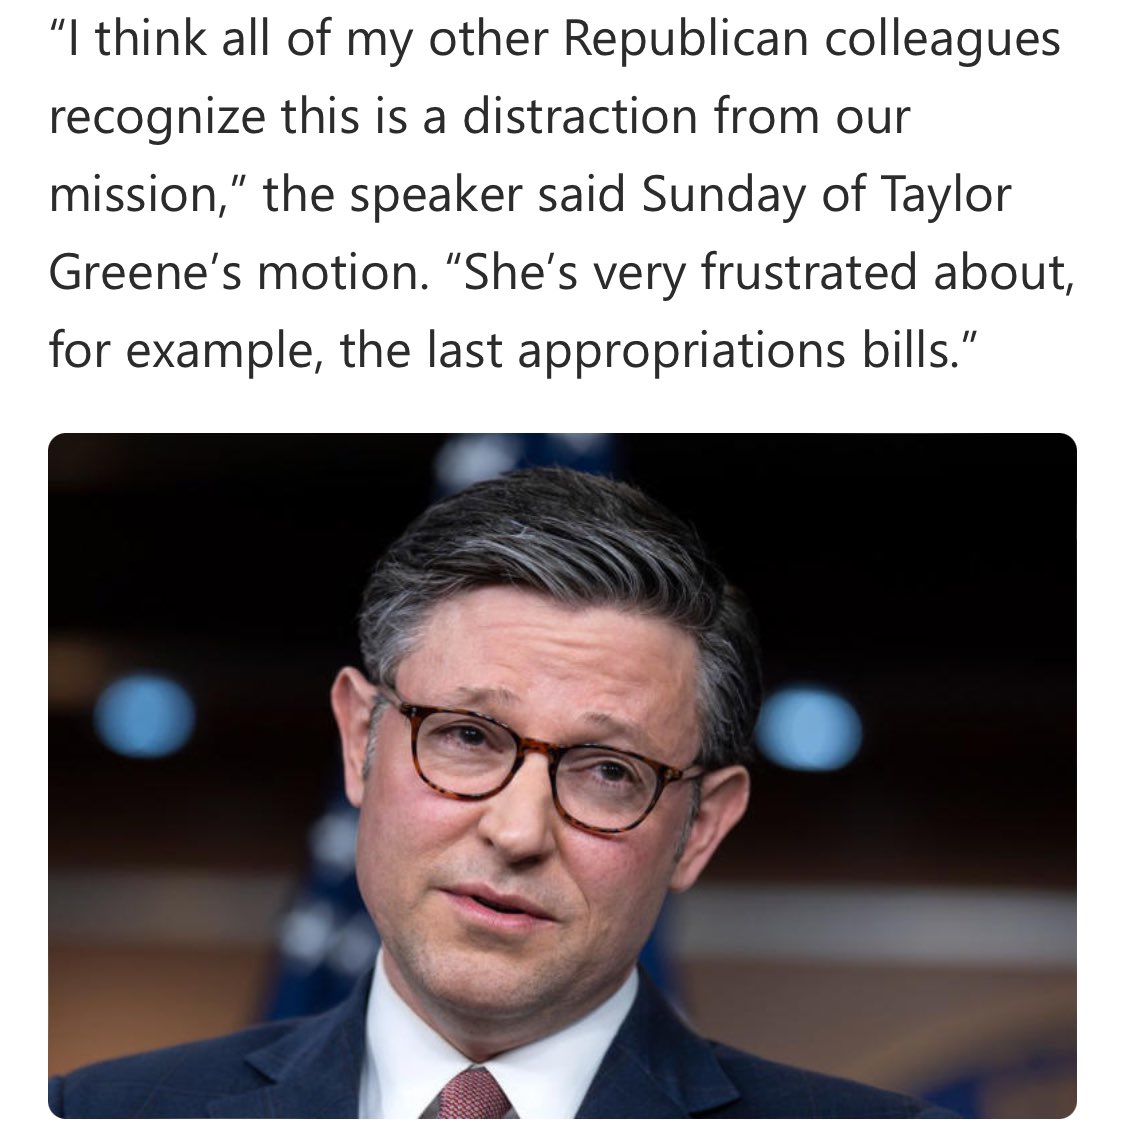 What’s your mission sir? We are starting to wonder when you: suspend all of our rules, give us no time to read bills, increase foreign aid, include earmarks that undermine morality, spend more w/omnibus than Pelosi, don’t secure the border, and pass laws with more D’s than R’s.